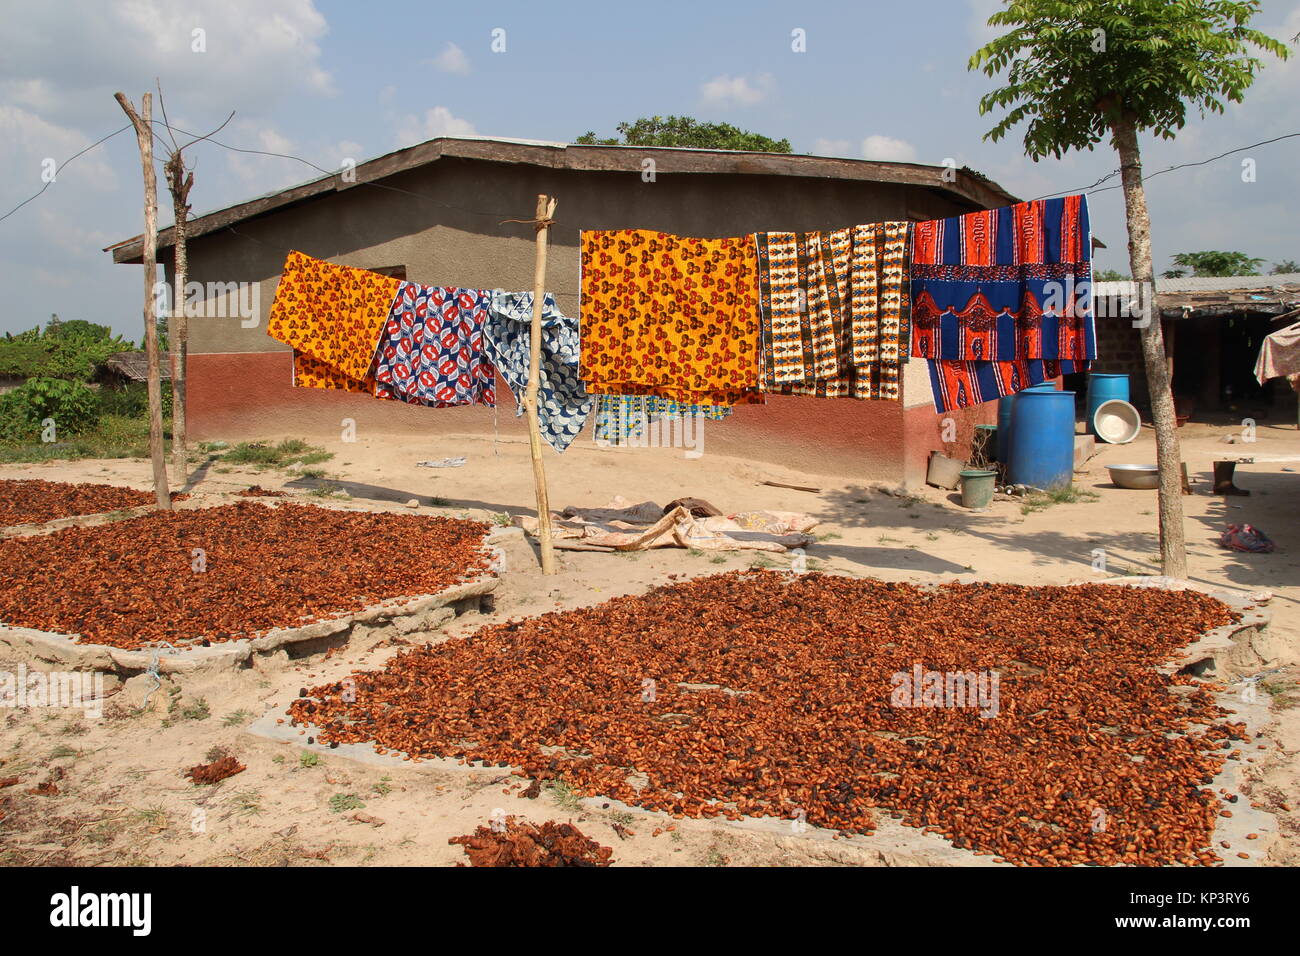 Cocoa beans that were harvested shortly before are dried in the sun in the village Konan Yaokro, Ivory Coast, 1 December 2017. Most chocolate in Germany comes from Weste Africa, where more and more children work in the cocoa plantations. Photo: Jürgen Bätz/dpa Stock Photo